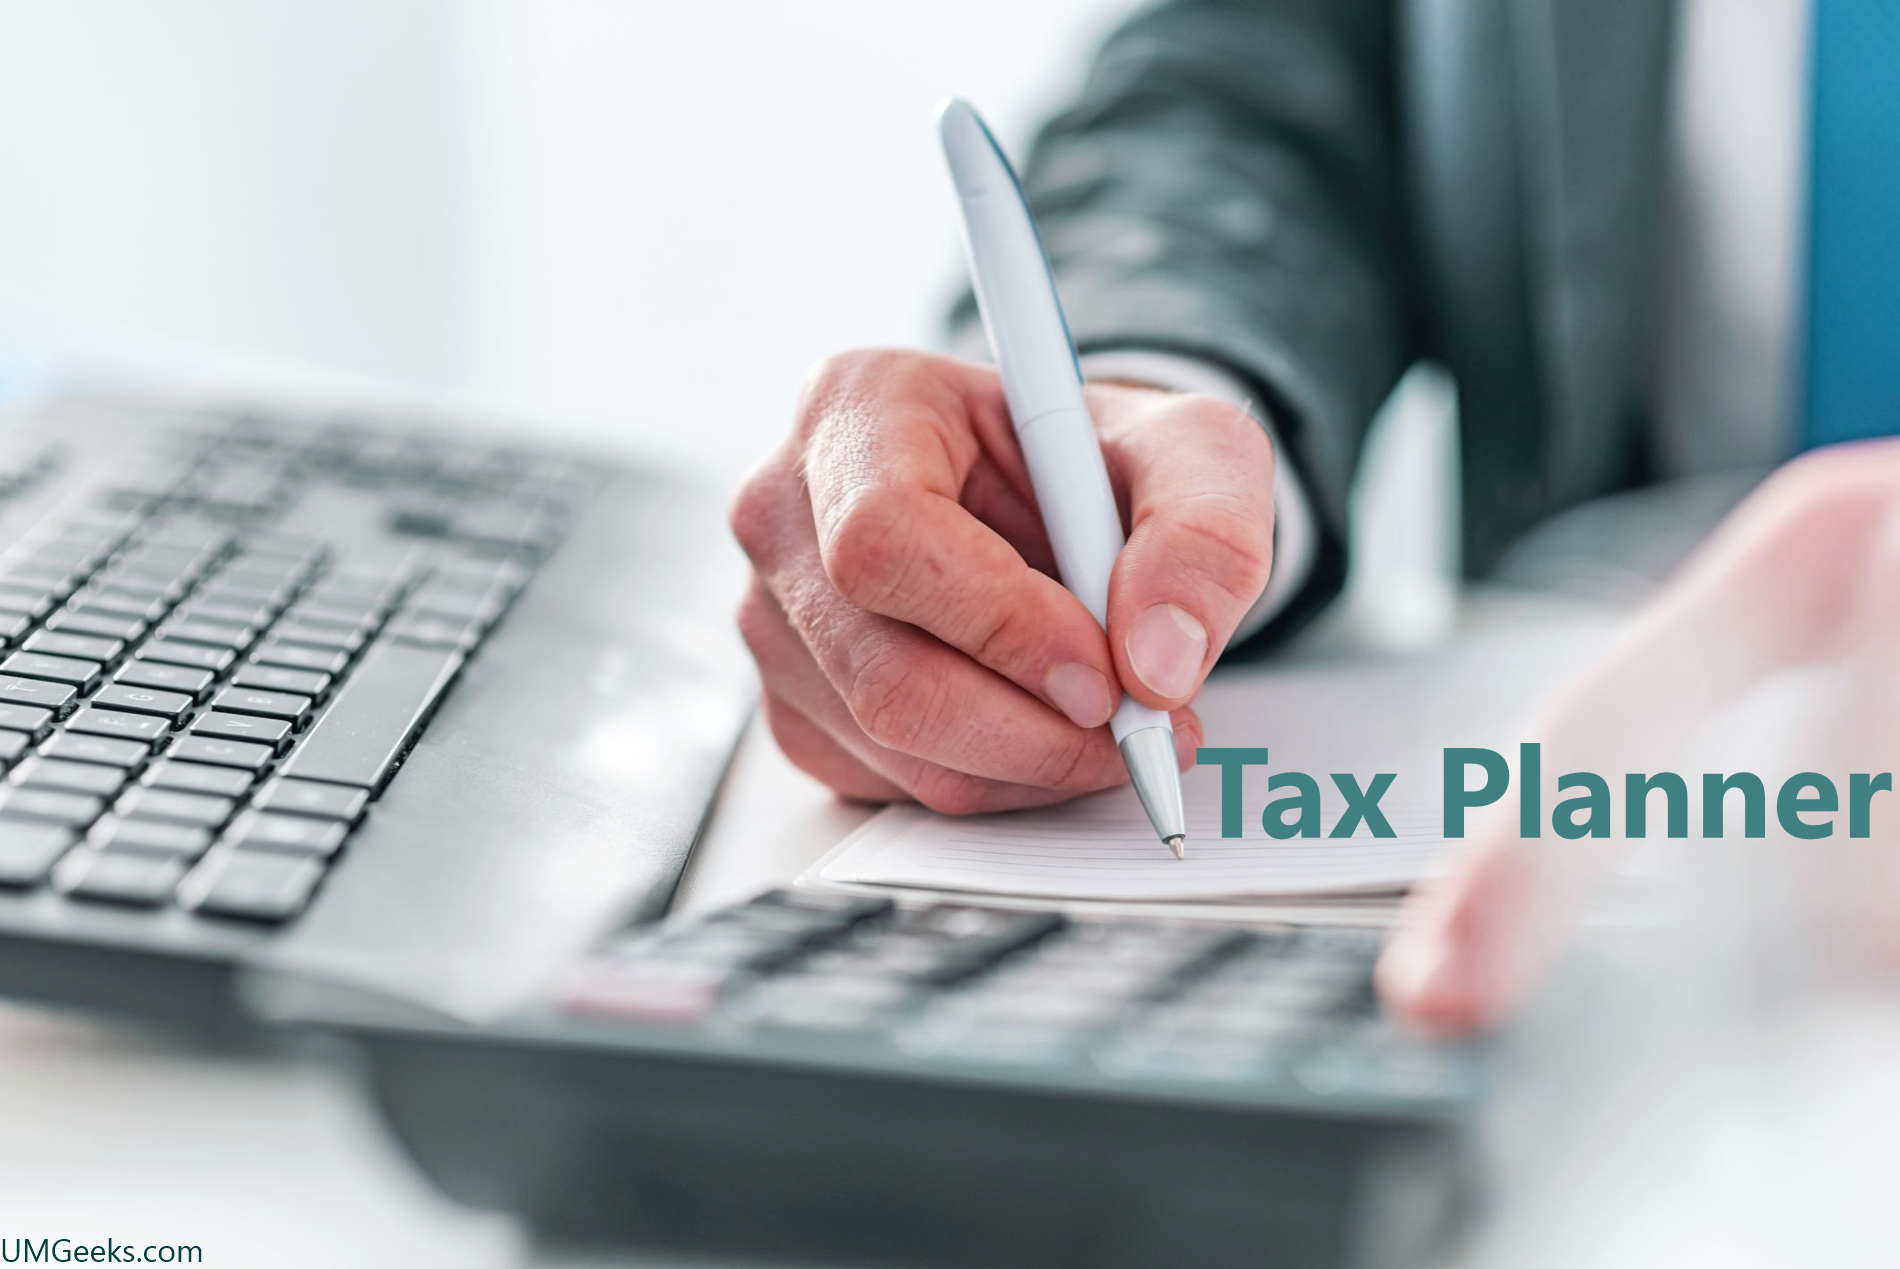 Why Do I Need a Tax Planner?